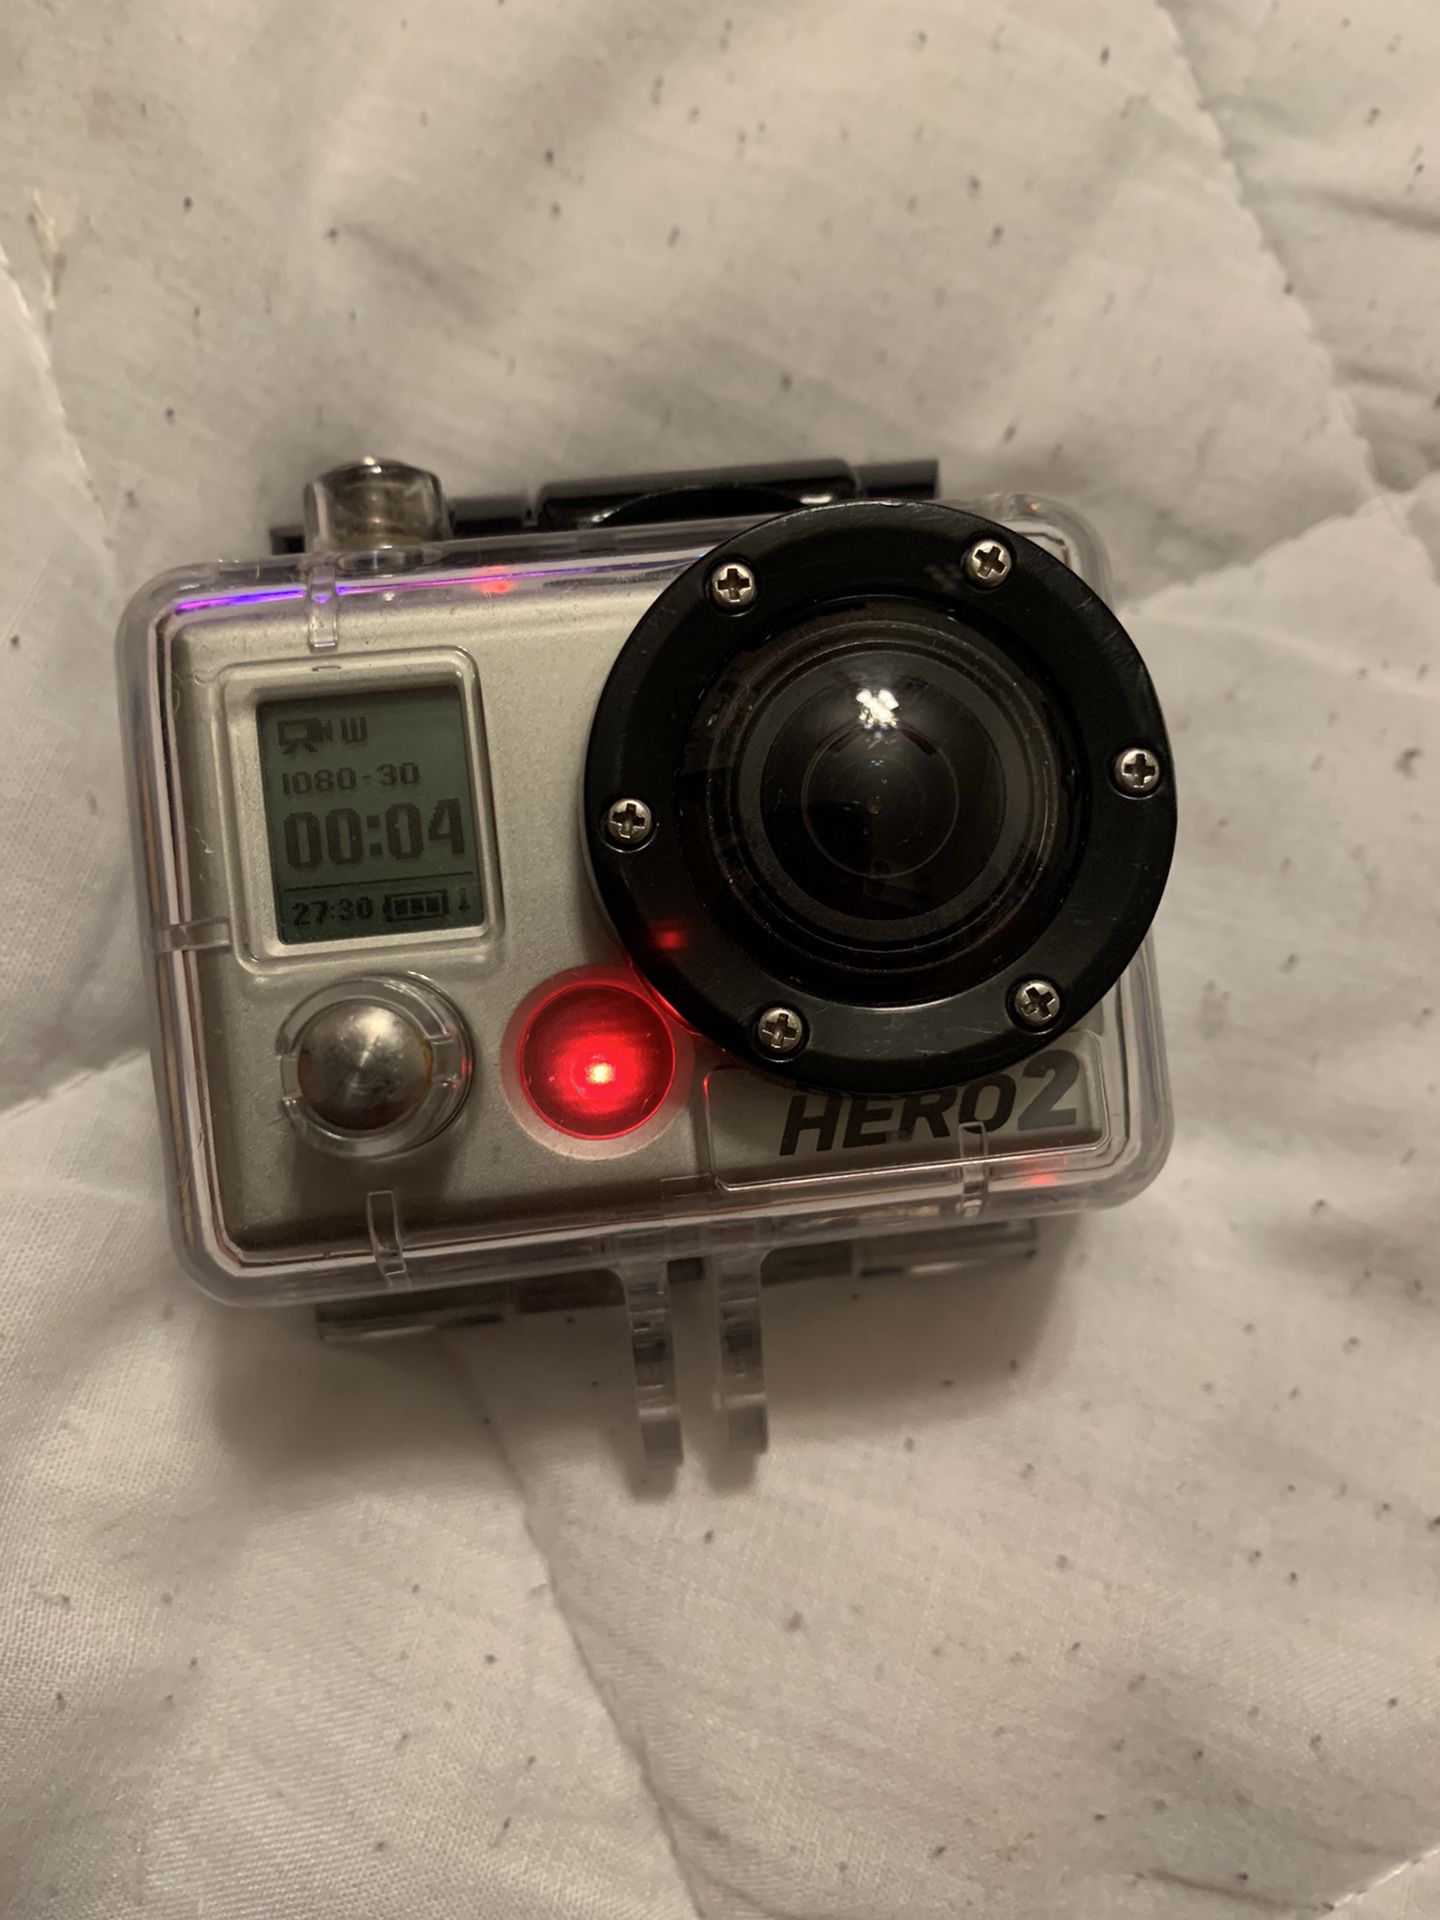 GoPro Hero 2 Action Camera (Good Condition) $50 OBO Cash Only No Trades